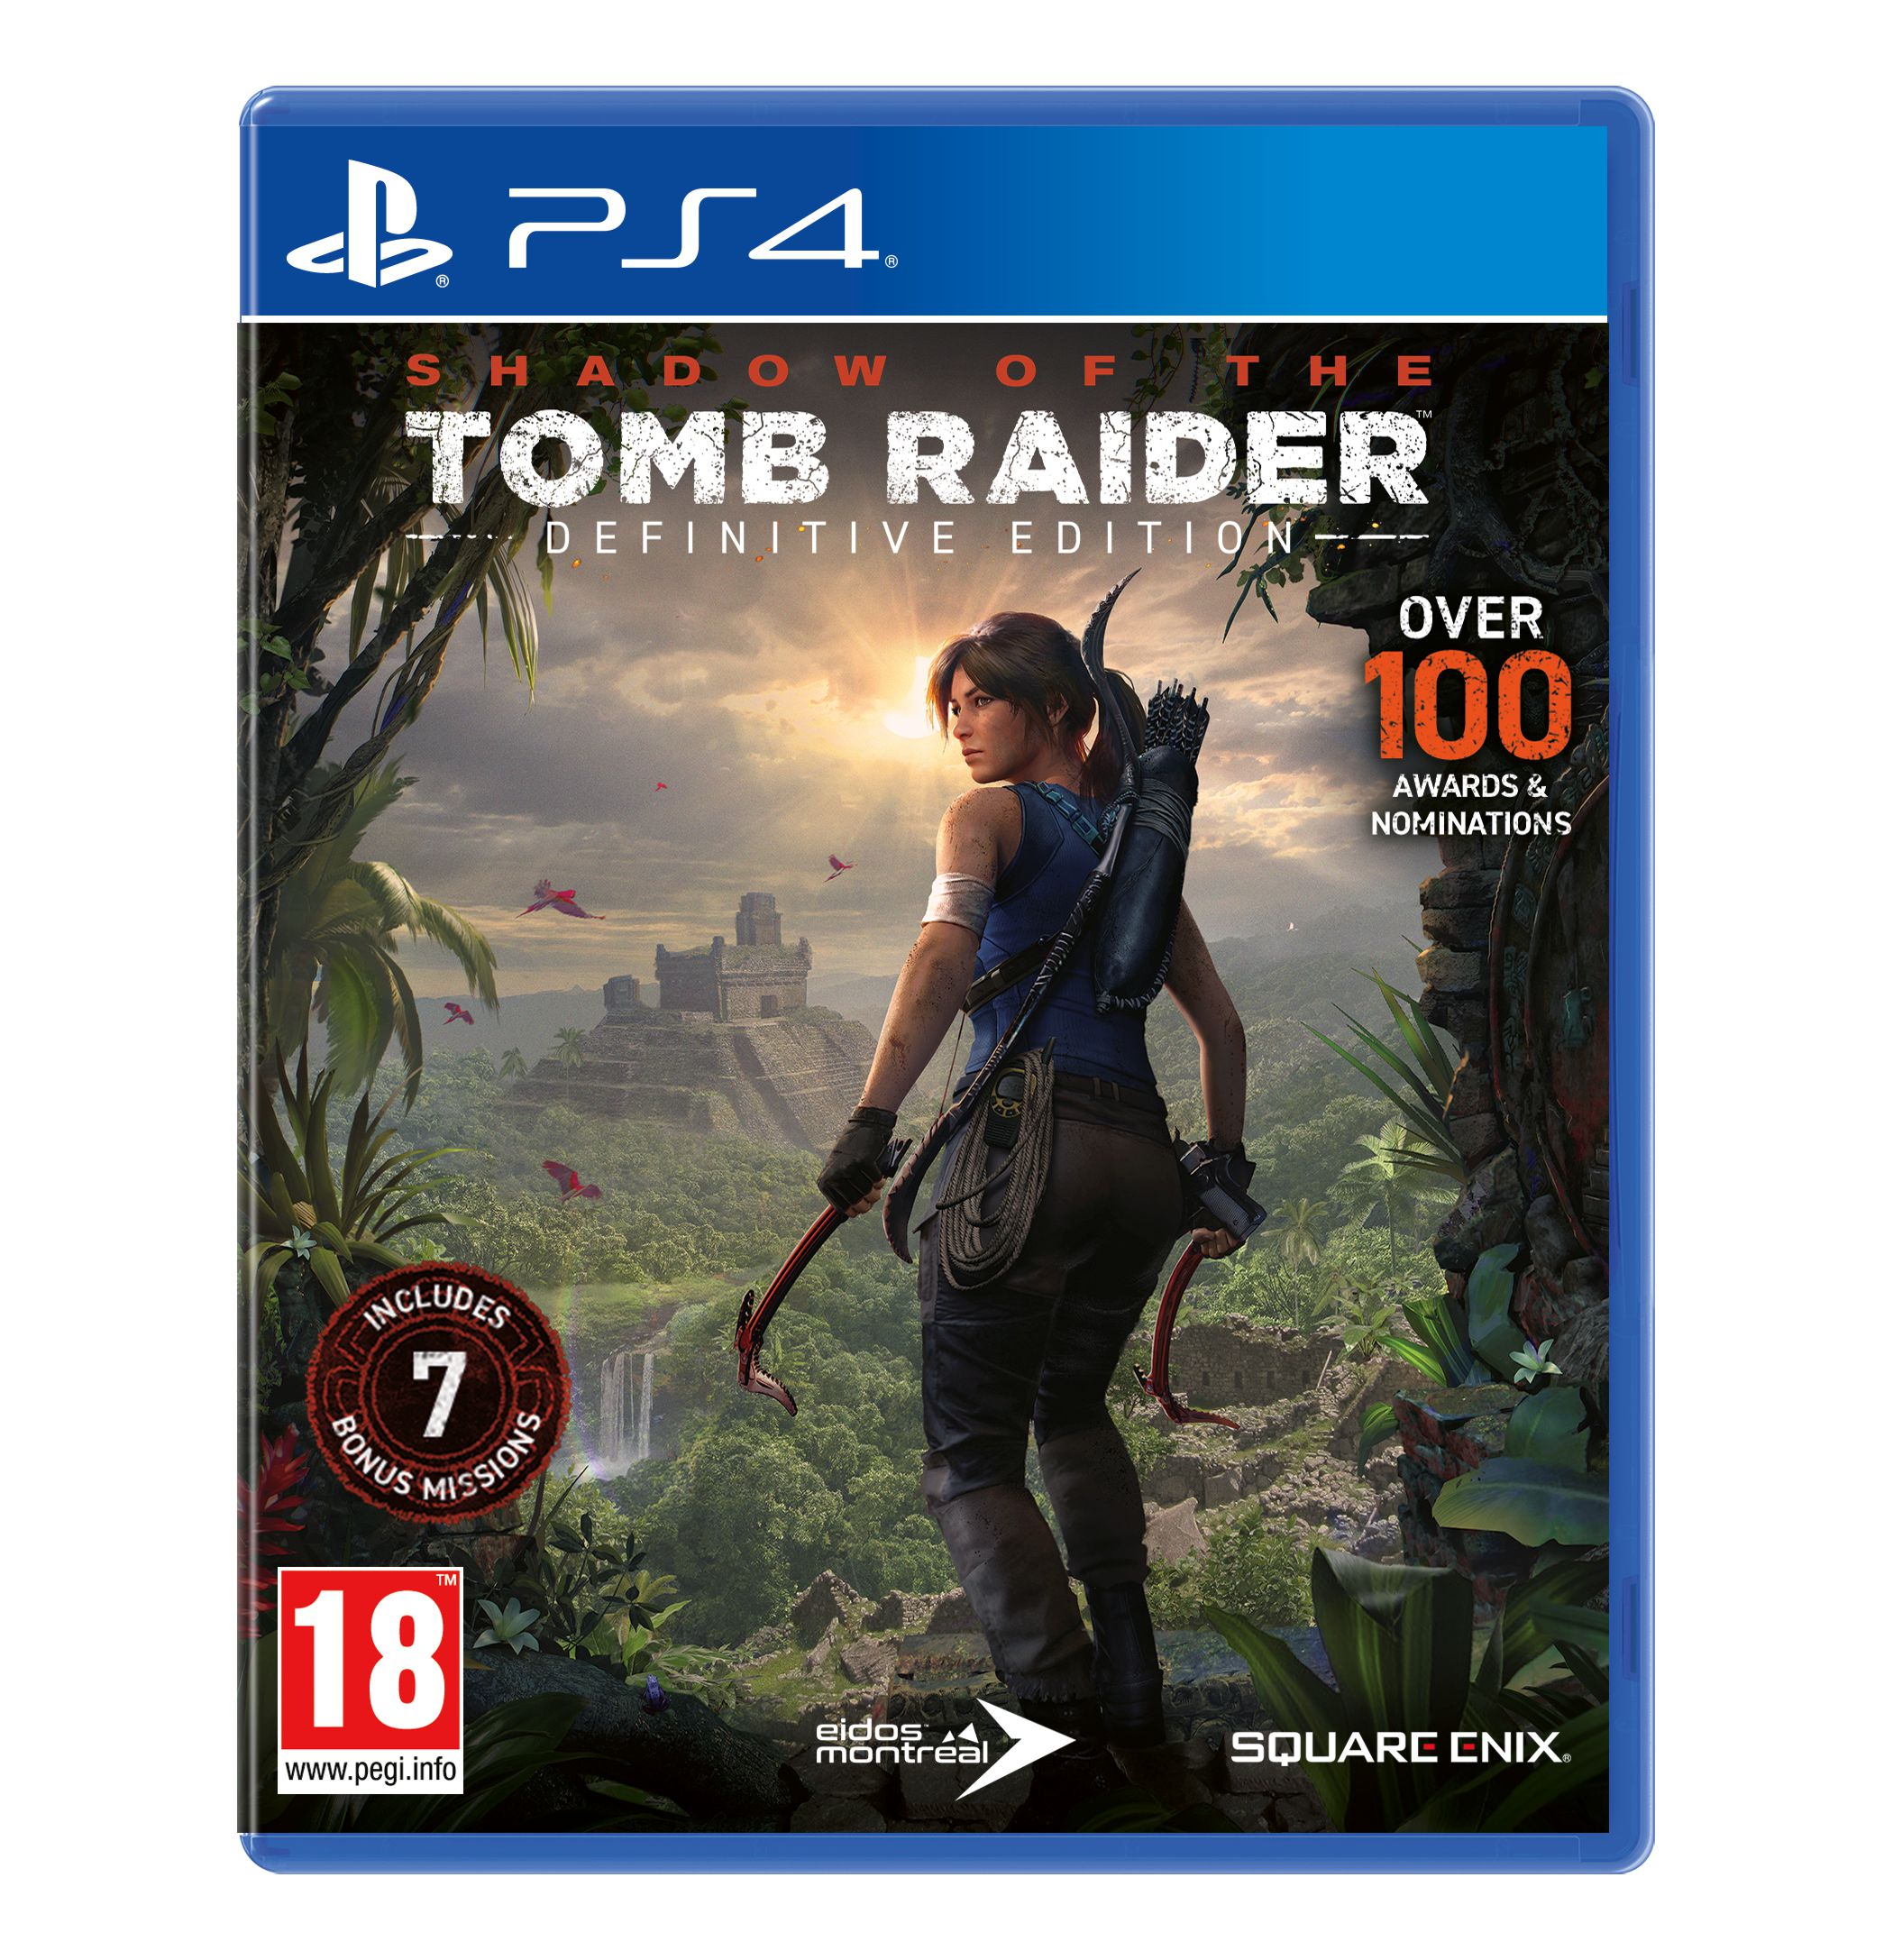 shadow of the tomb raider definitive edition ps4 game